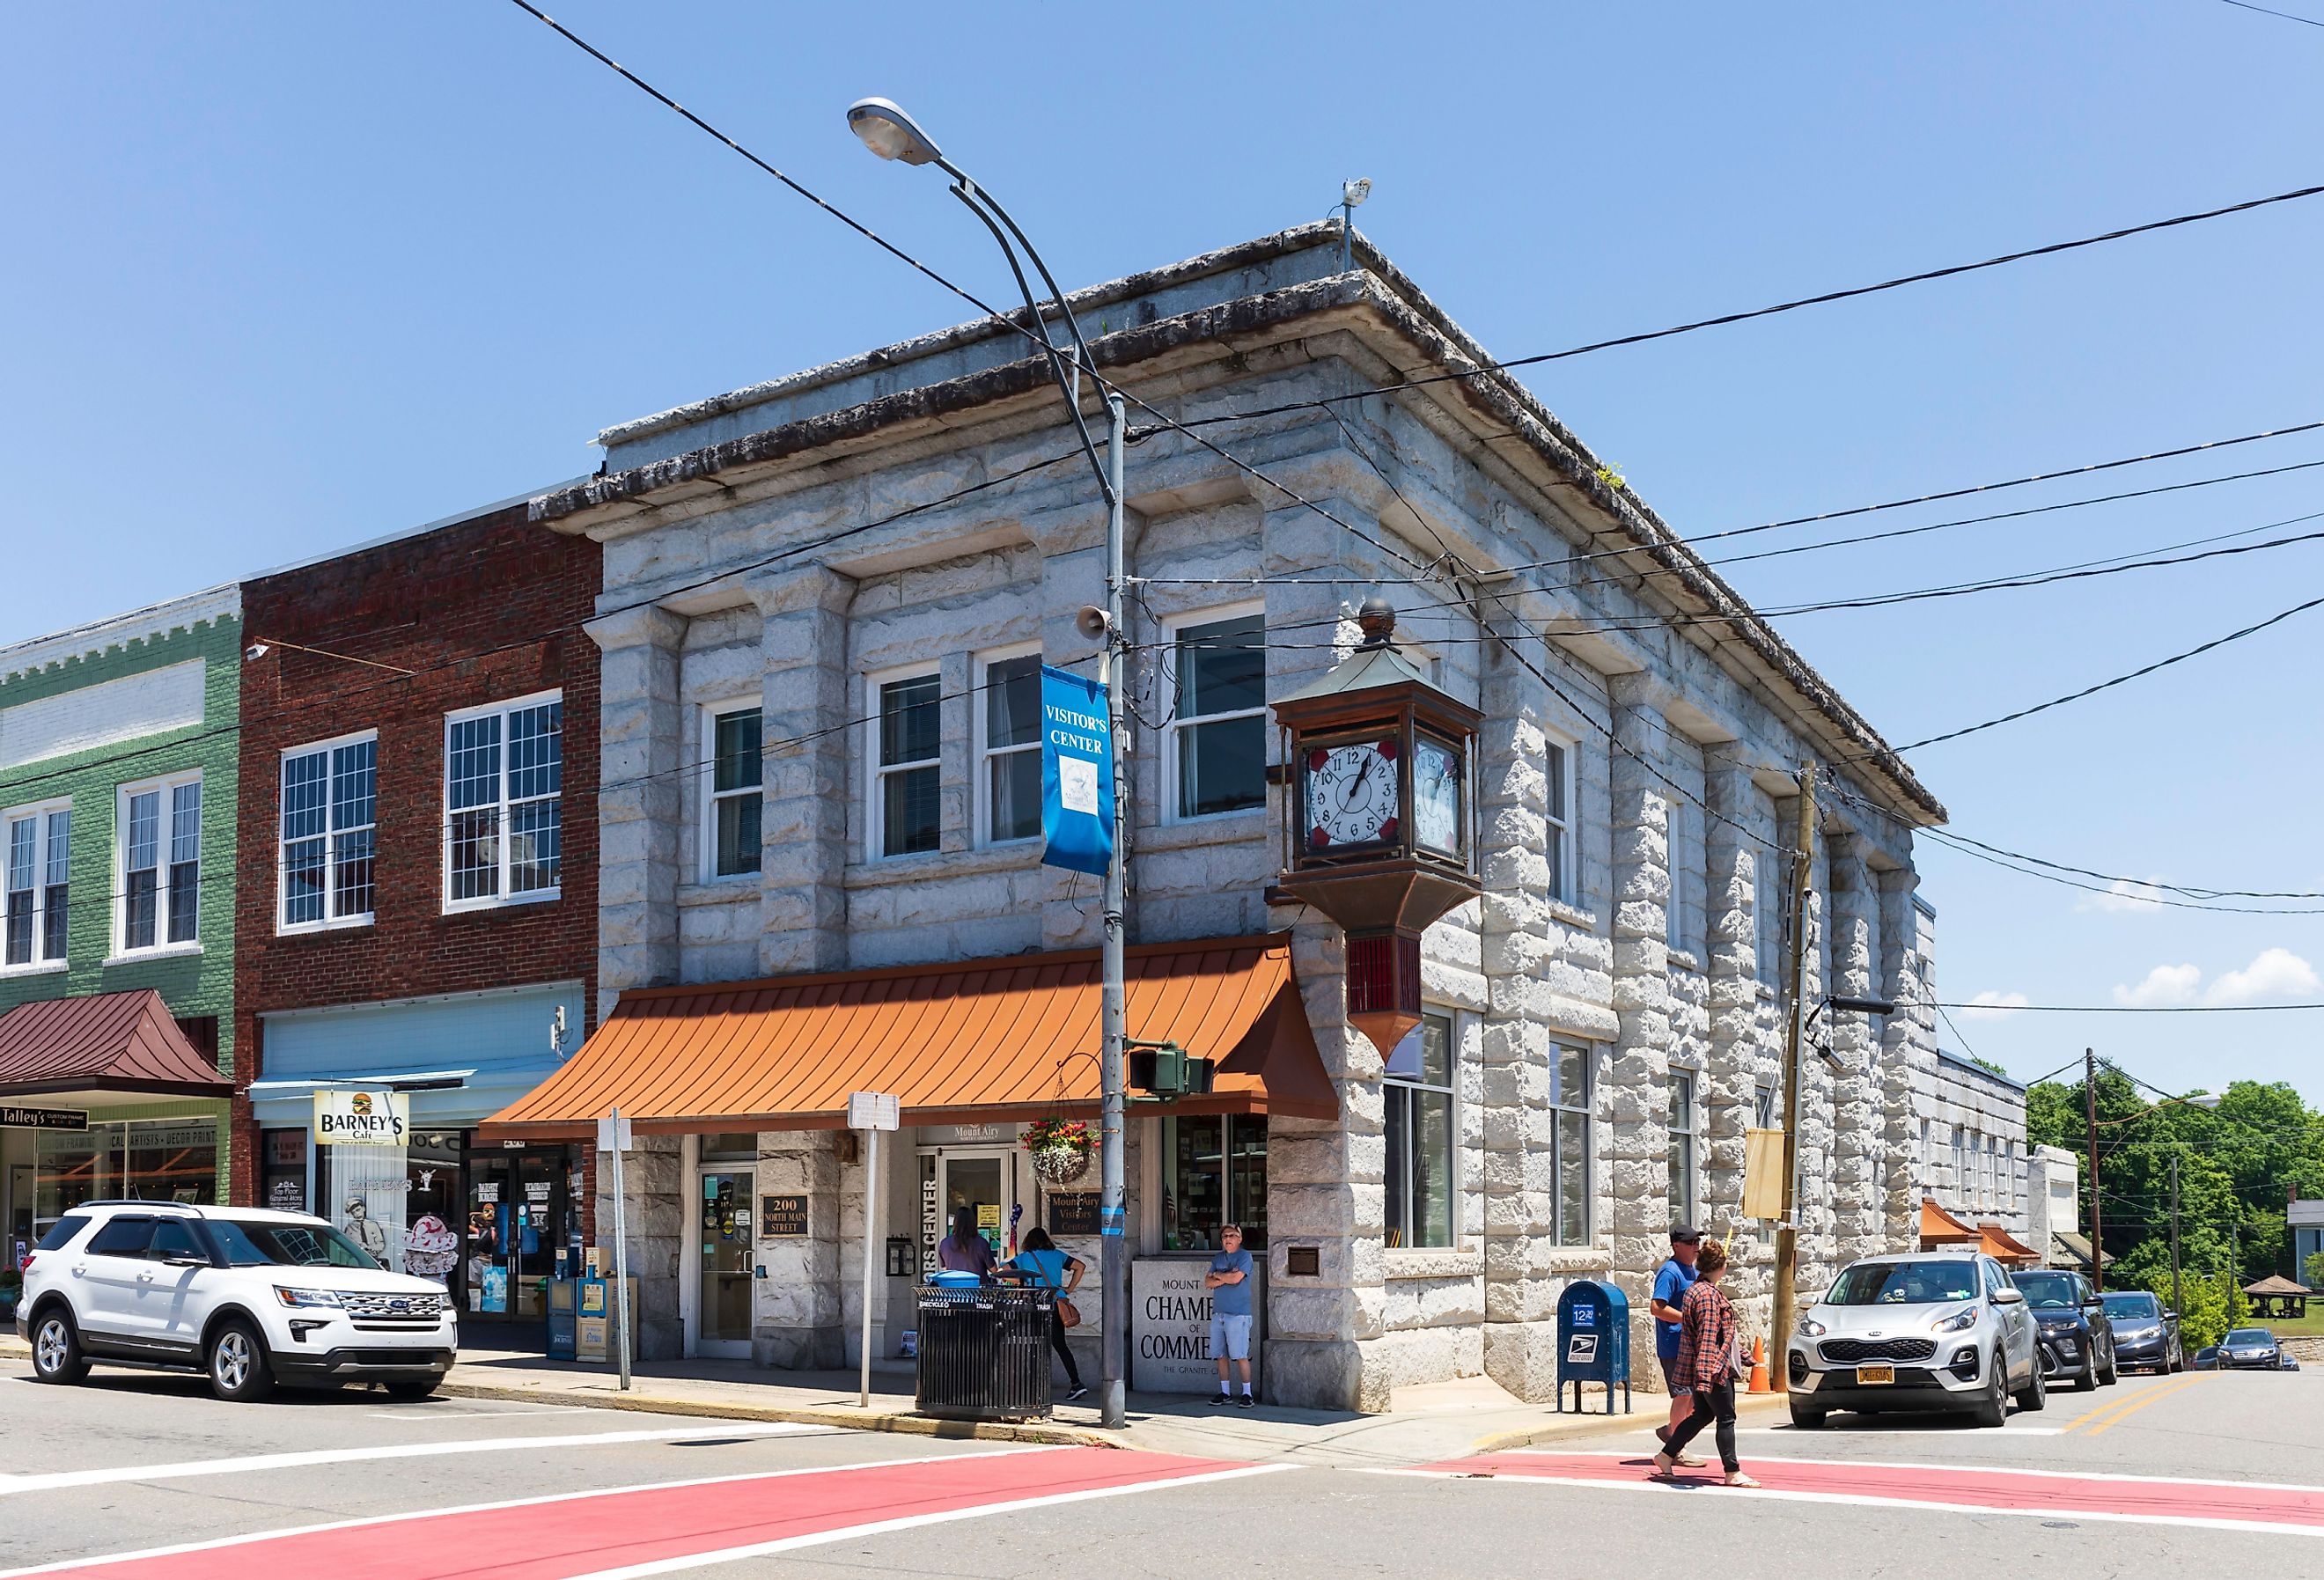 he Mount Airy Chamber of Commerce and Visitors' Center sets on Main Street, next to Barney's Café. People. Image credit Nolichuckyjake via Shutterstock.